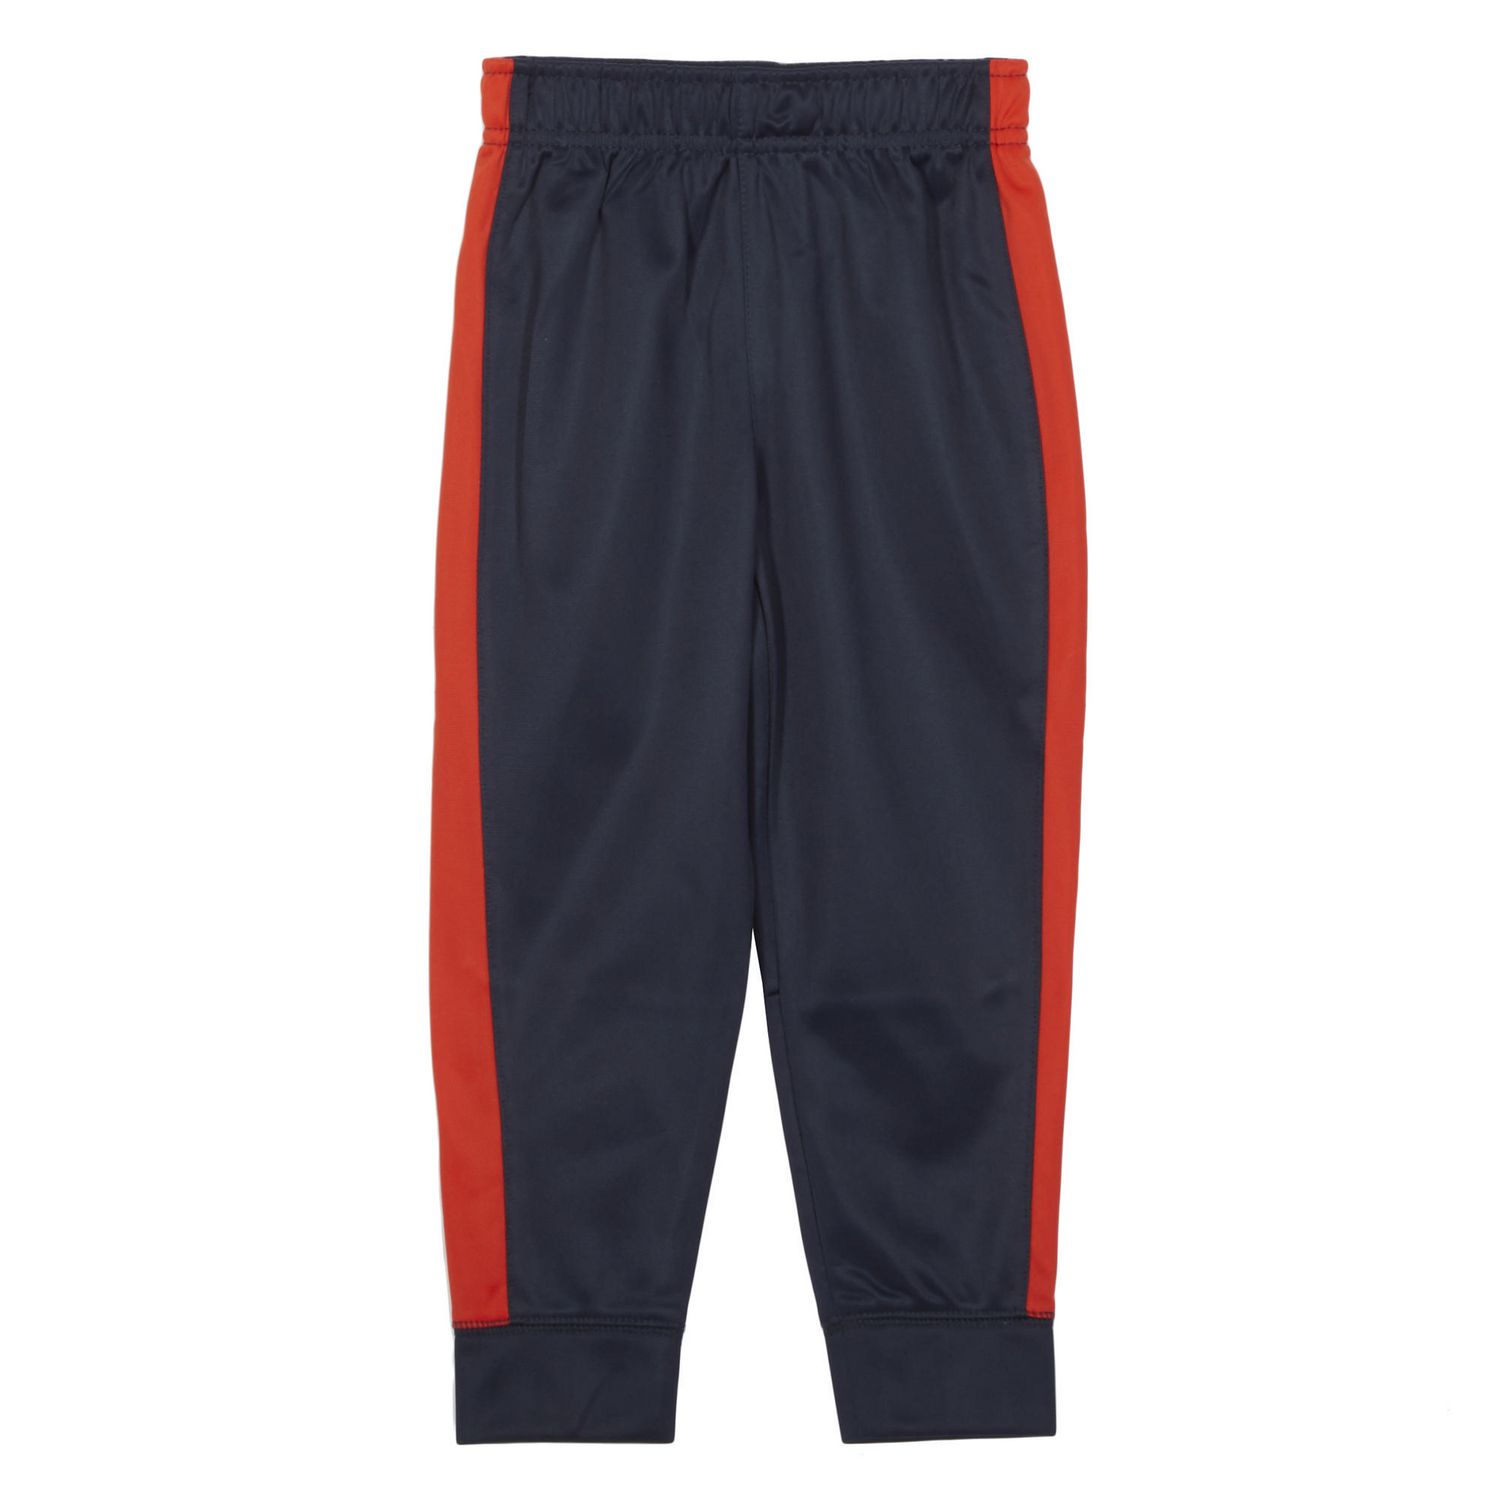 Athletic Works Toddler Boys’ 2-Piece Tricot Track Suit | Walmart Canada